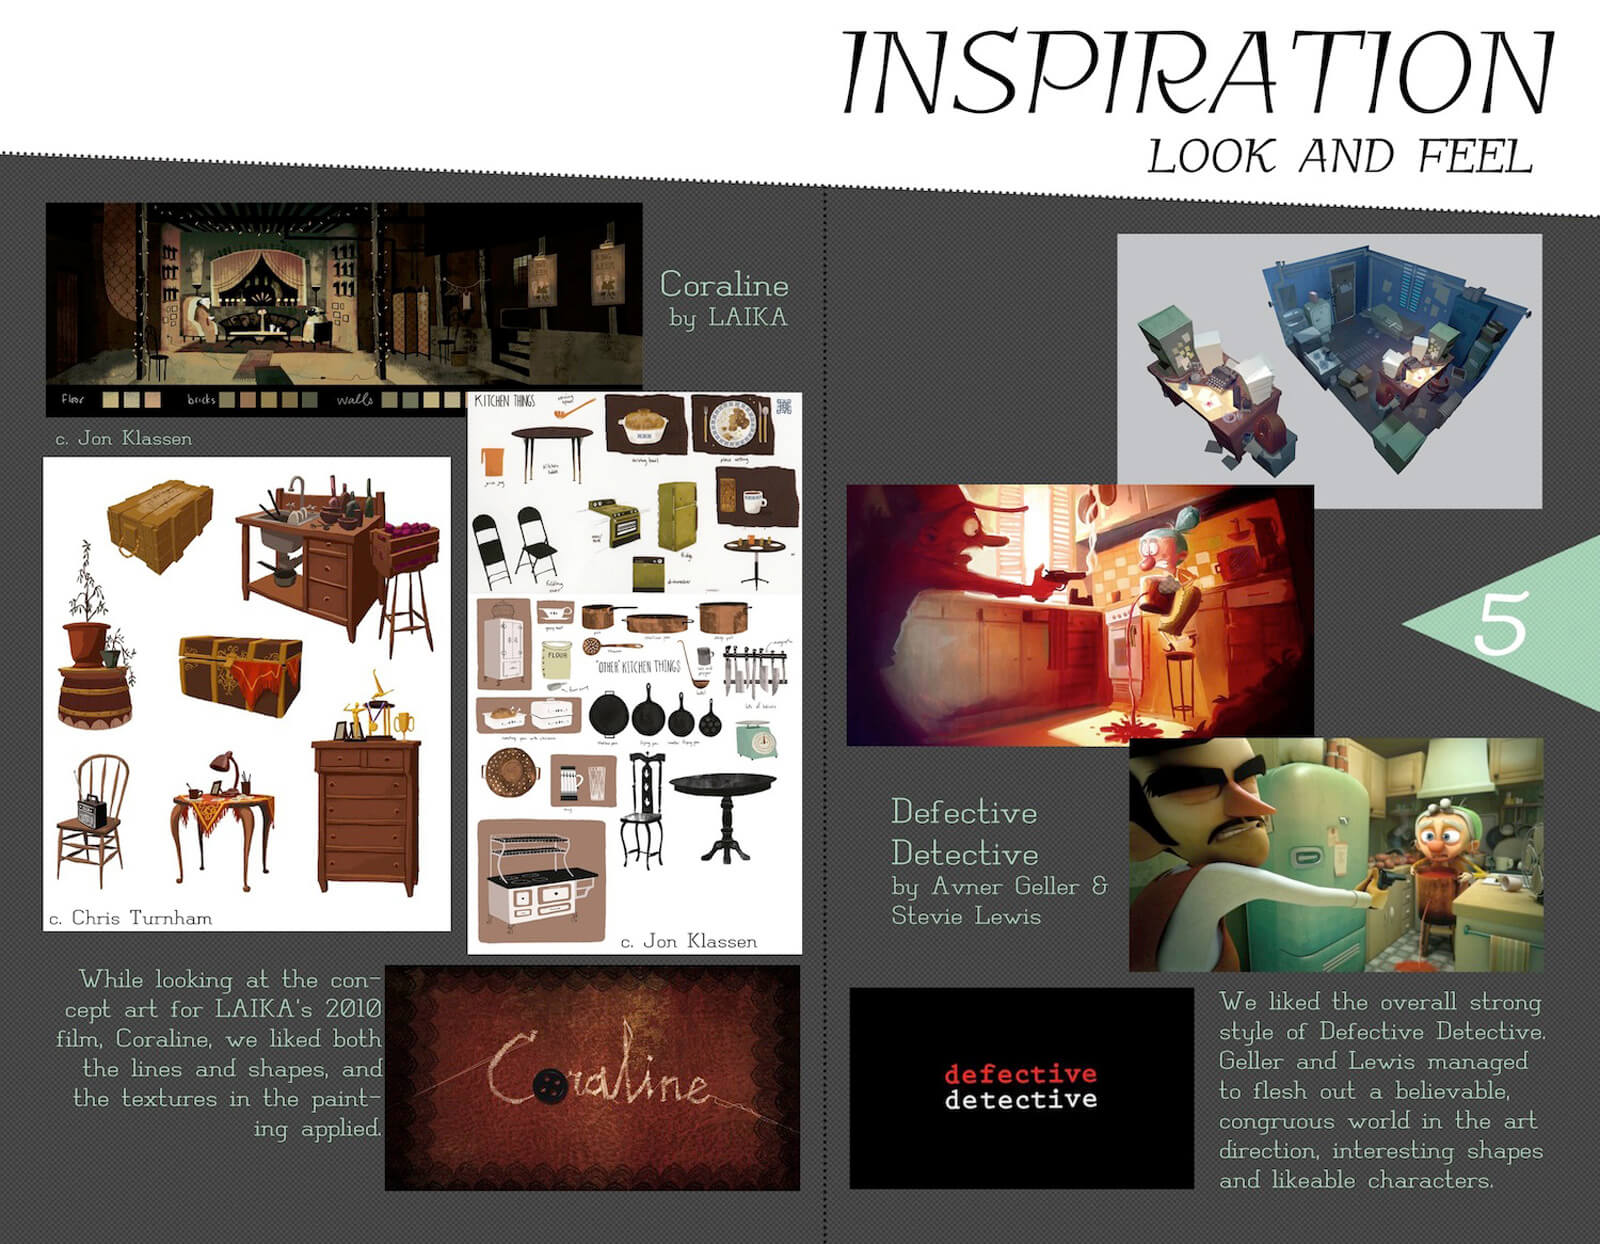 Look and feel inspiration slide for the film Super Secret, depicting reference art from Coraline and Defective Detective